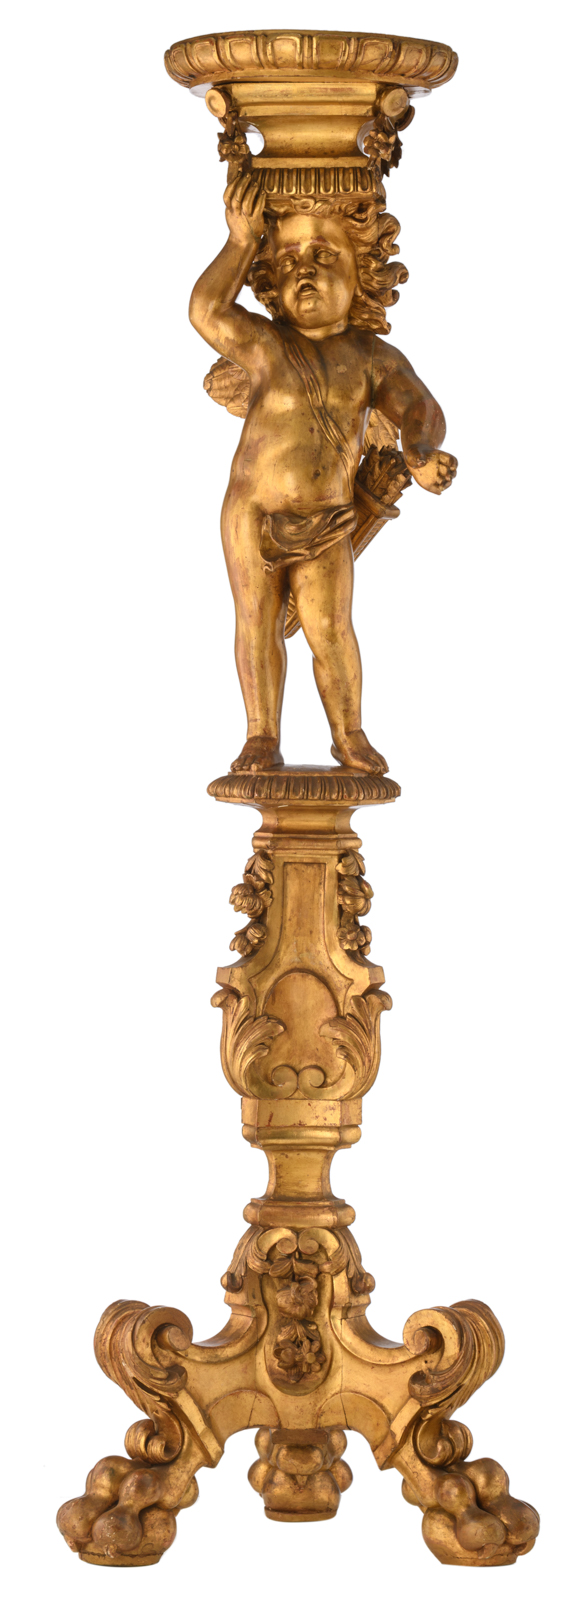 A 19thC Baroque Revival gilt wooden pedestal depicting an Amor figure on a stand, H 149cm